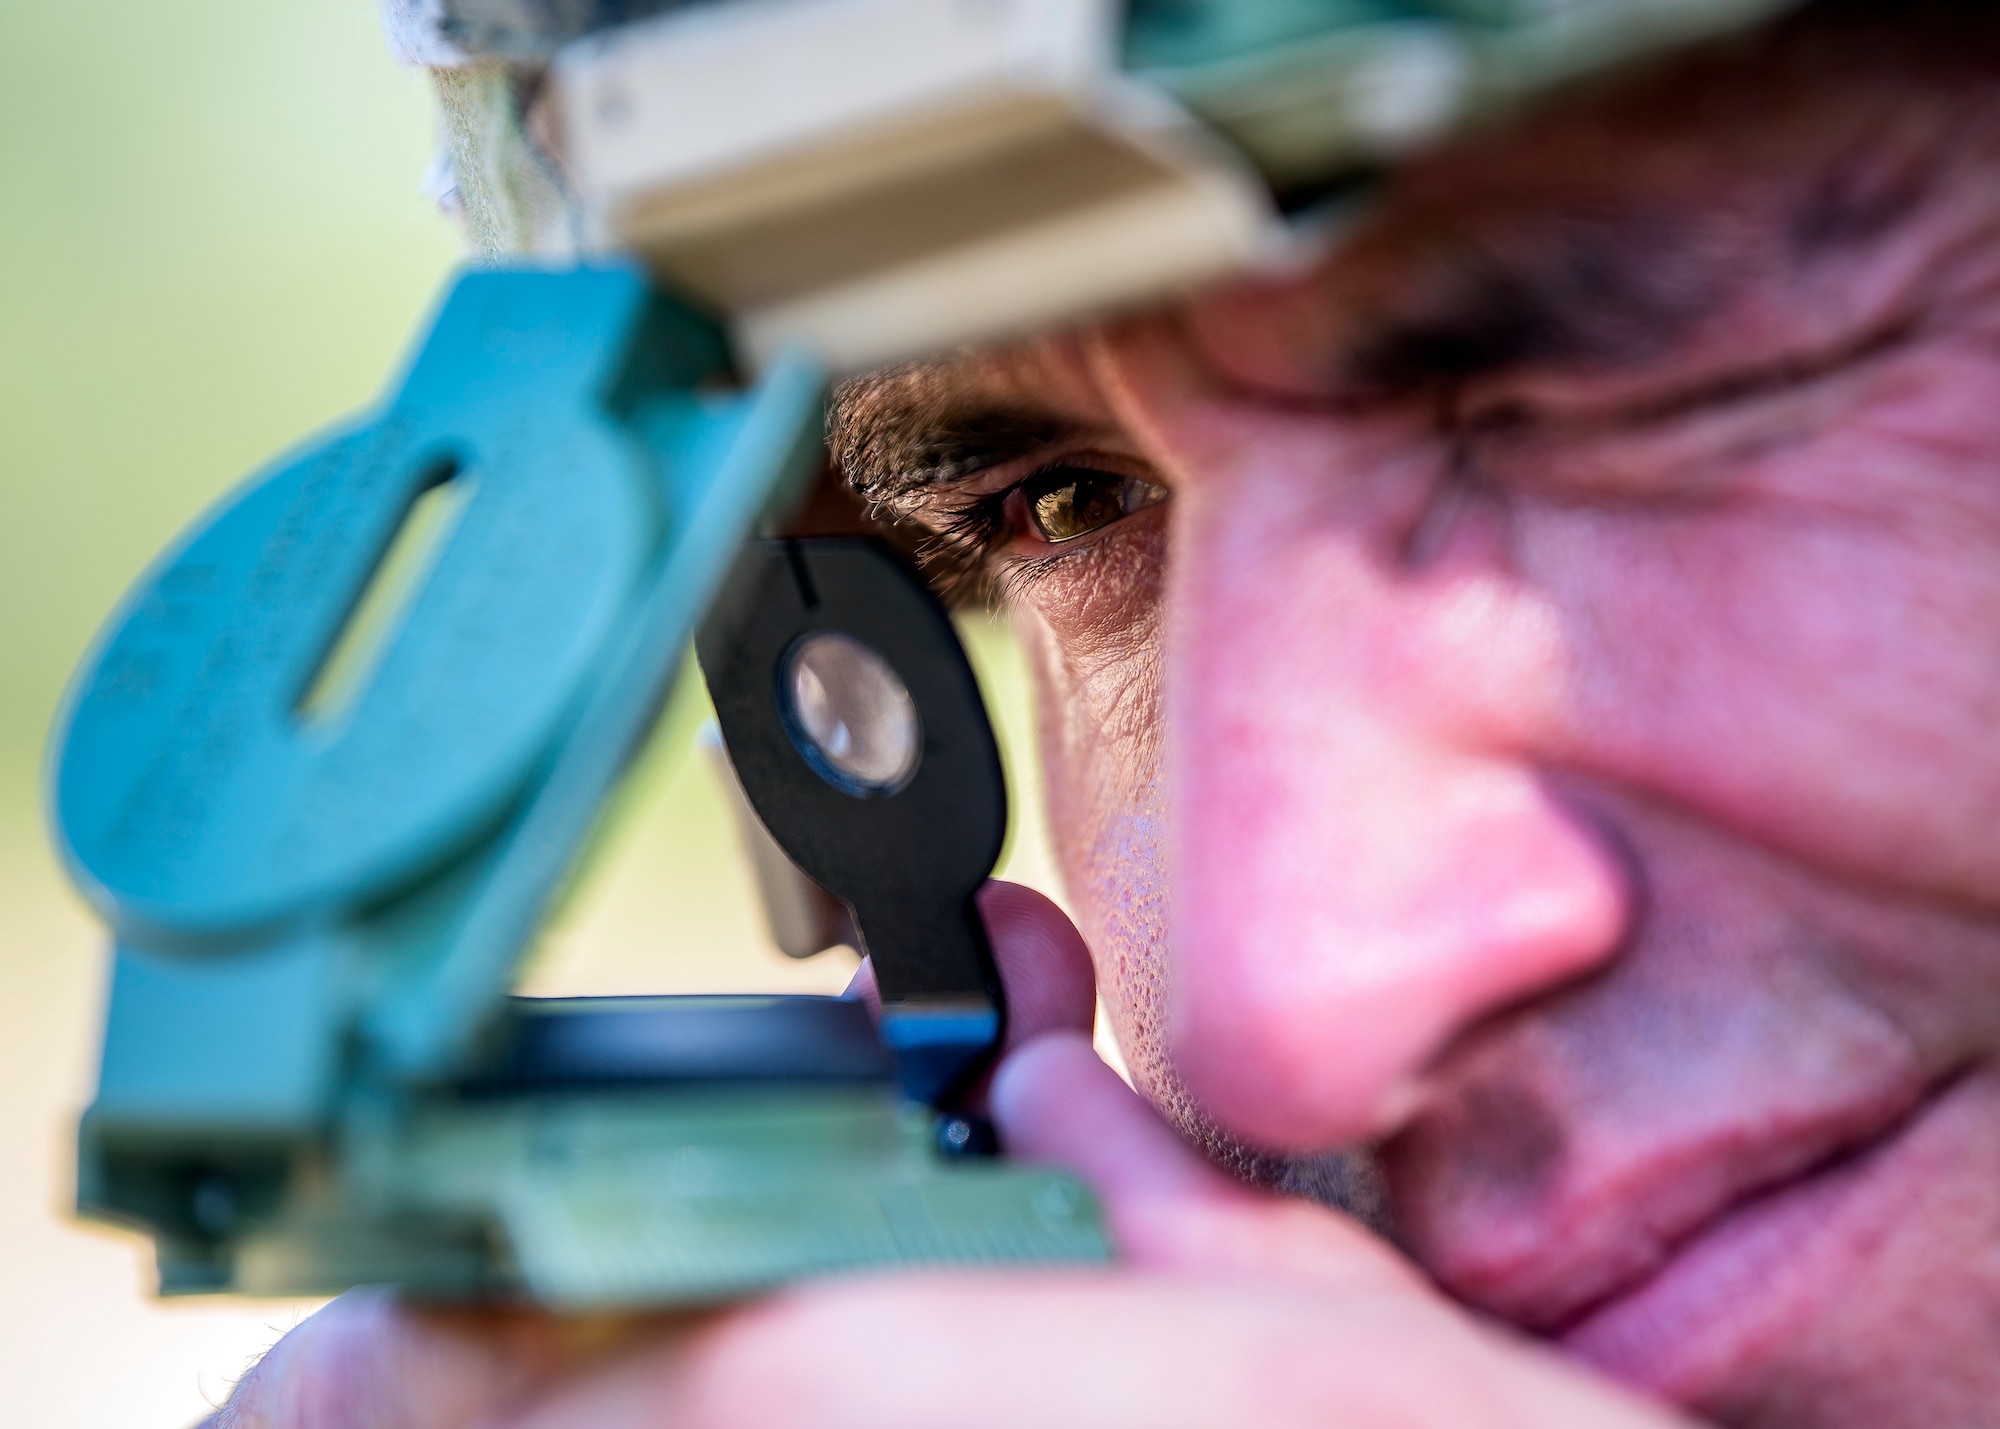 Master Sgt. James Kamphaus, 3d Weather Squadron mission support flight chief, reads a compass during a certification field exercise (CFX), July 31, 2019, at Camp Bowie Training Center, Texas. The CFX was designed to evaluate the squadron’s overall tactical ability and readiness to provide the U.S. Army with full spectrum environmental support to the Joint Task Force (JTF) fight. The CFX immersed Airmen into all the aspects of what could come with a deployment such as Land Navigation. (U.S. Air Force photo by Airman 1st Class Eugene Oliver)